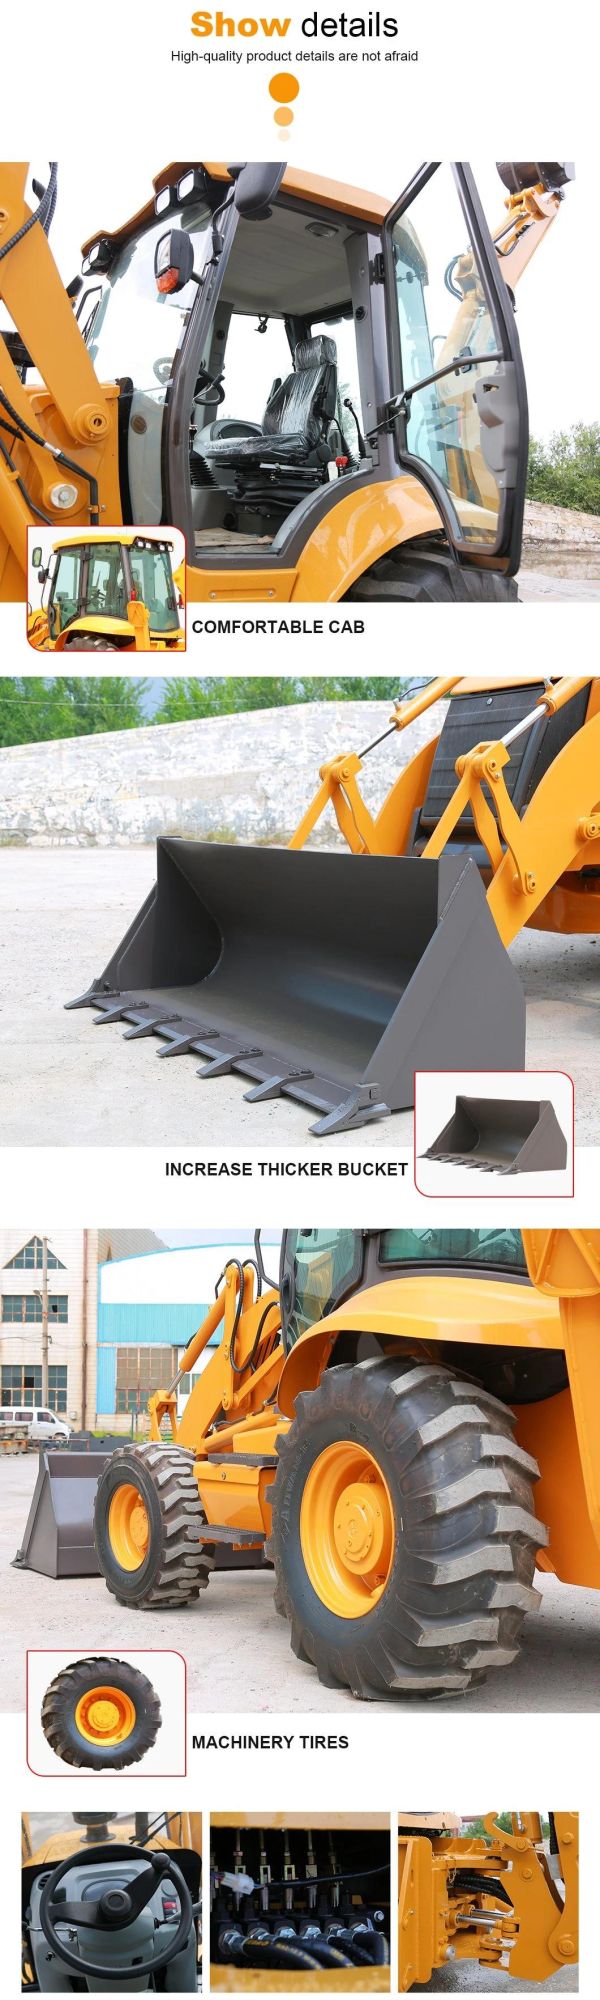 Cheap 4WD Mini Loader Multifunction Small Garden Tractor Backhoe Loader Excavator Loader Backhoe with Attachment for Sale